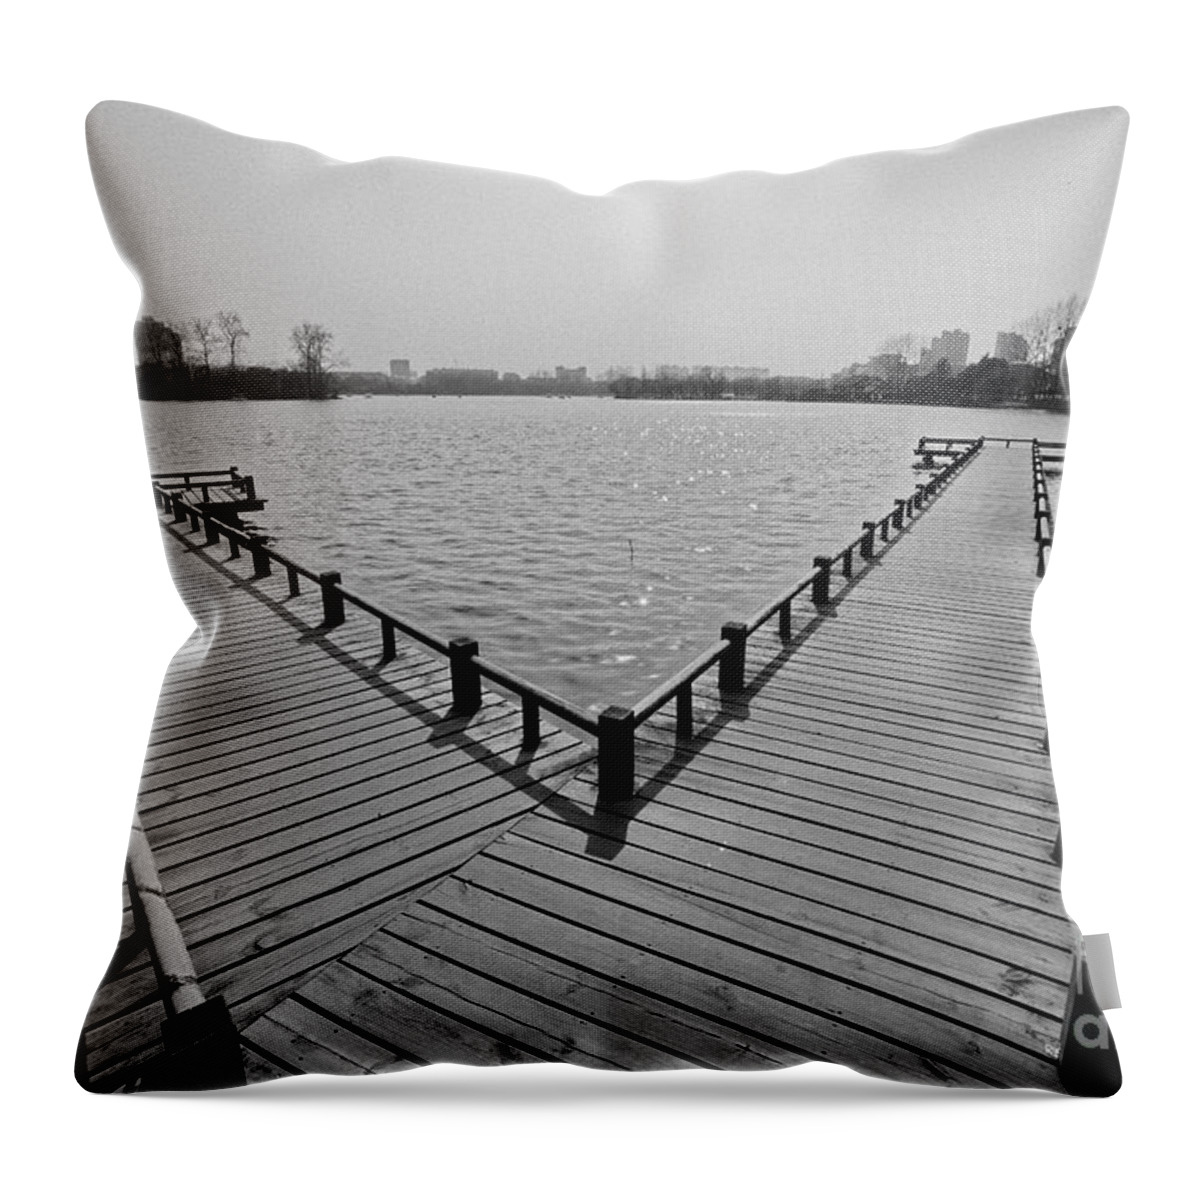 Black & White Throw Pillow featuring the photograph Choices by James L Davidson